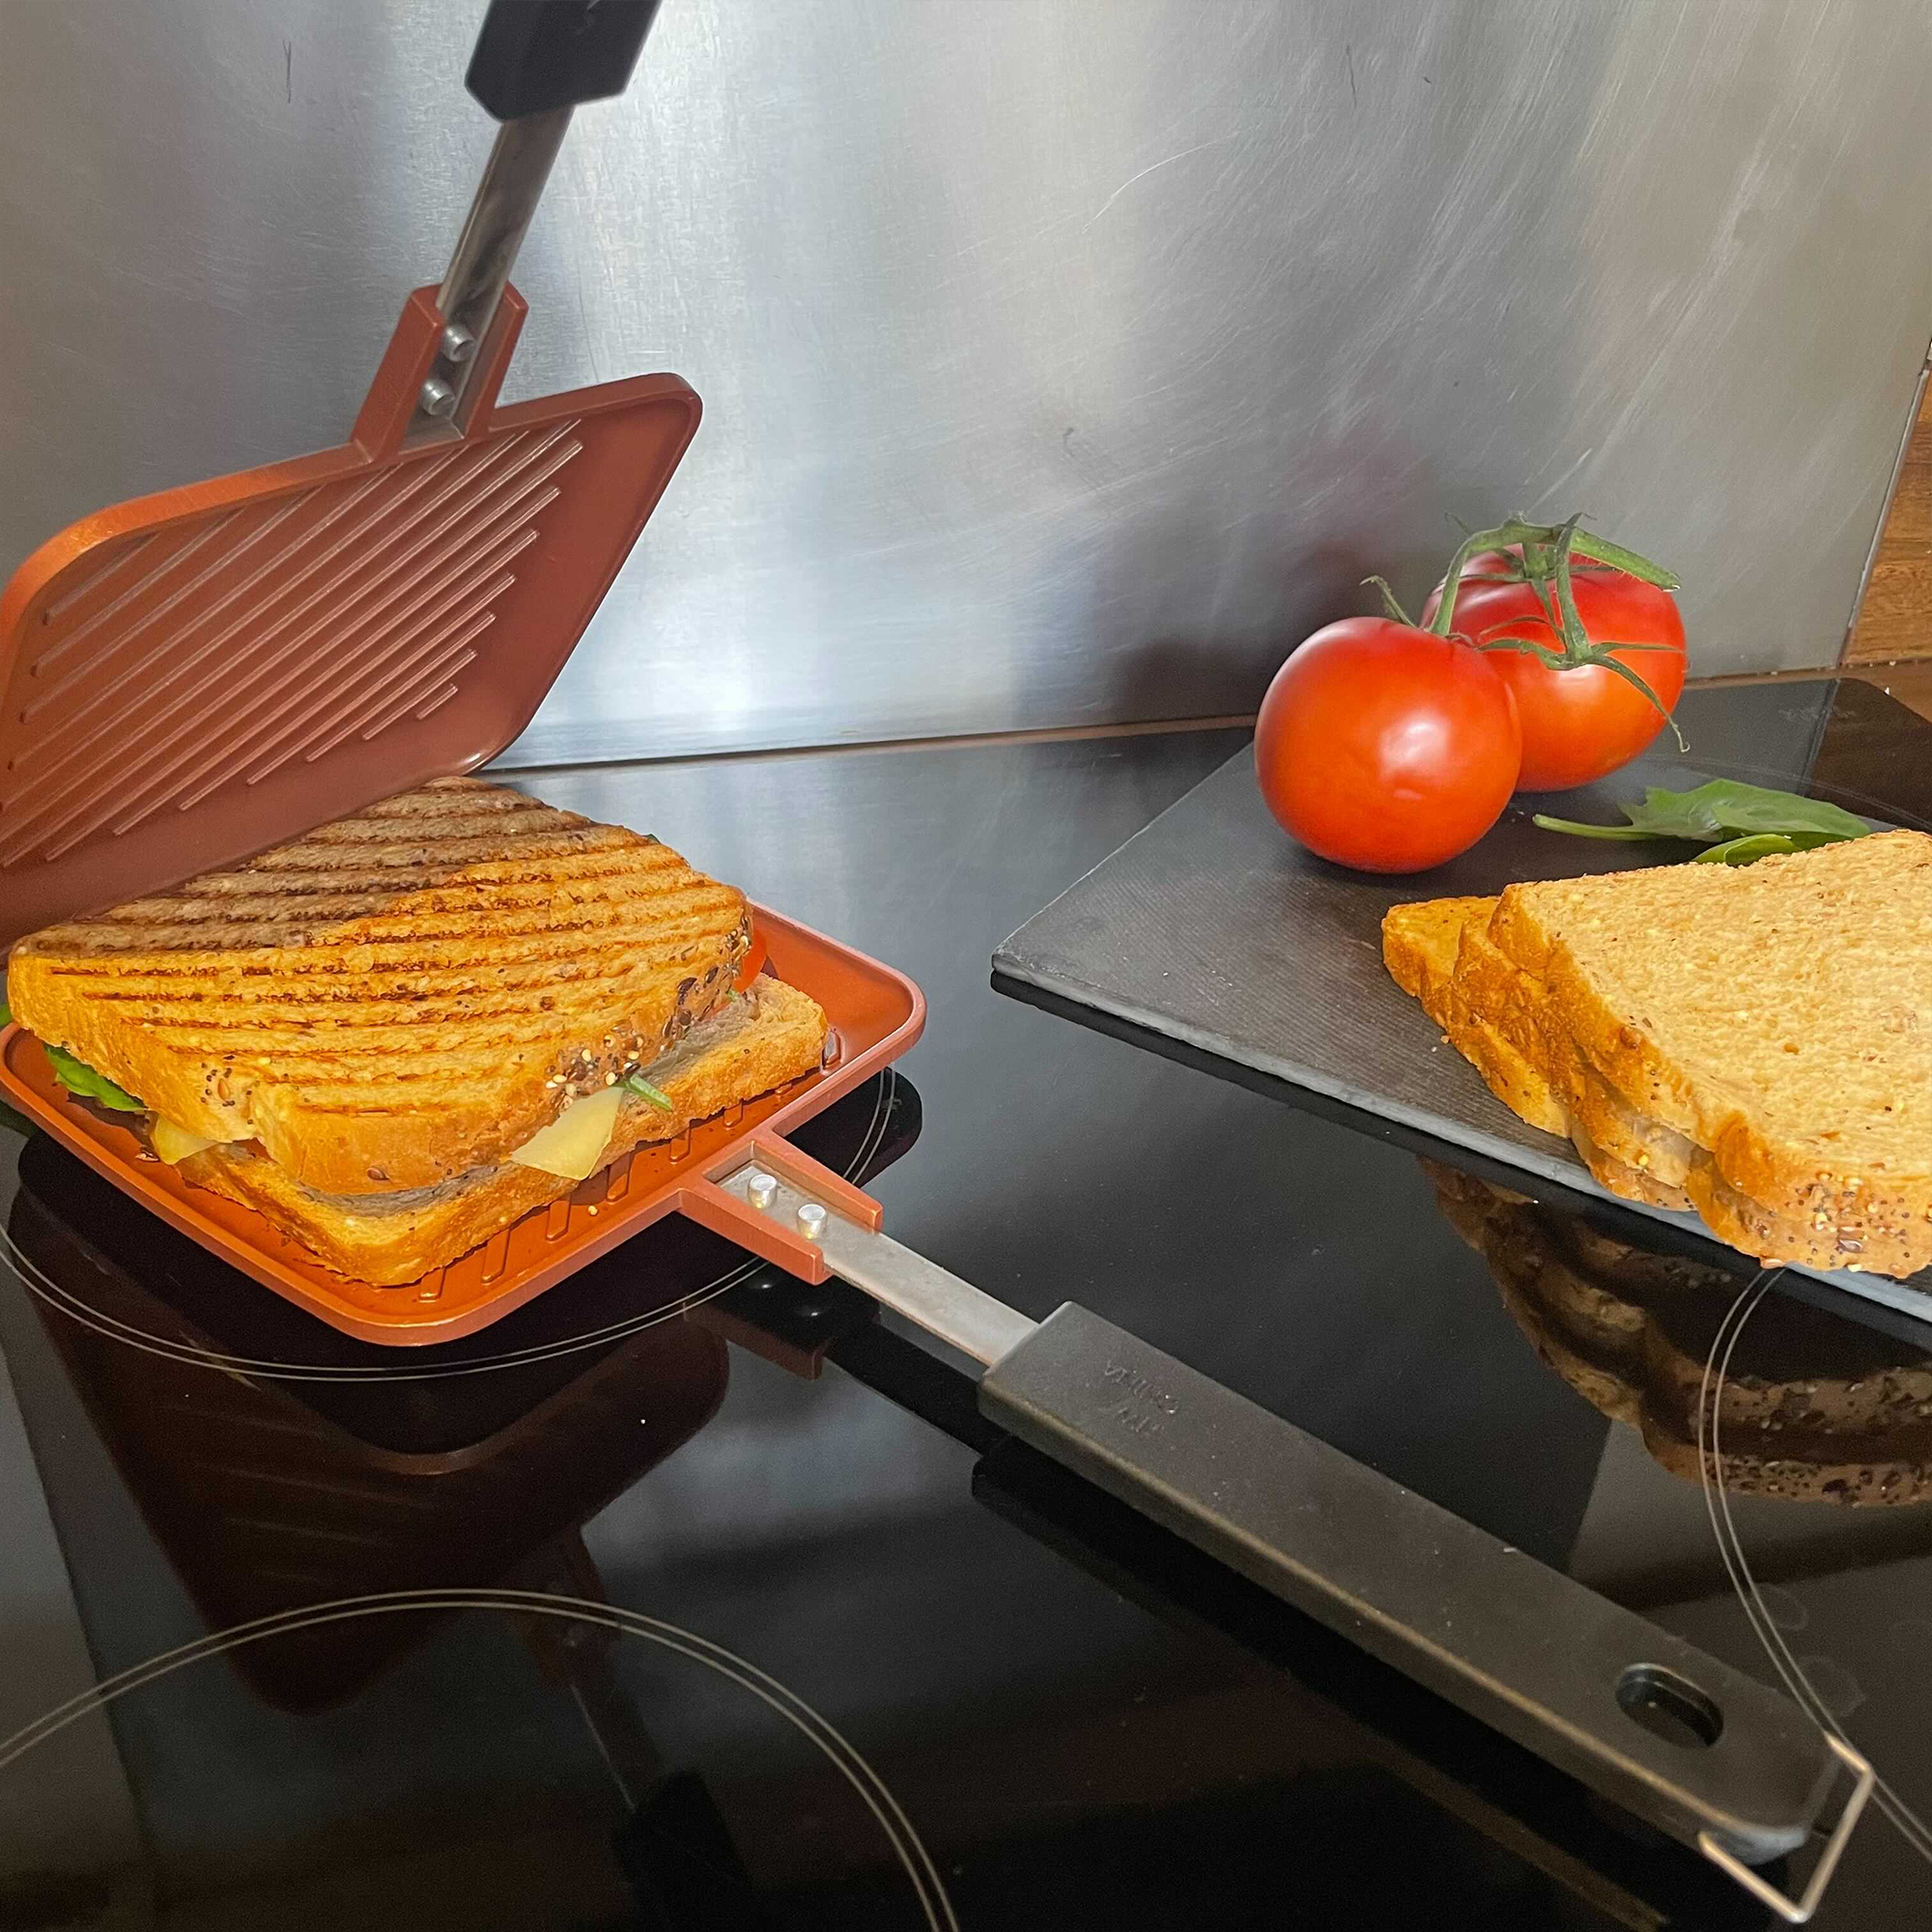 Stovetop Toastie Maker & Toasted Sandwich Maker, Silver